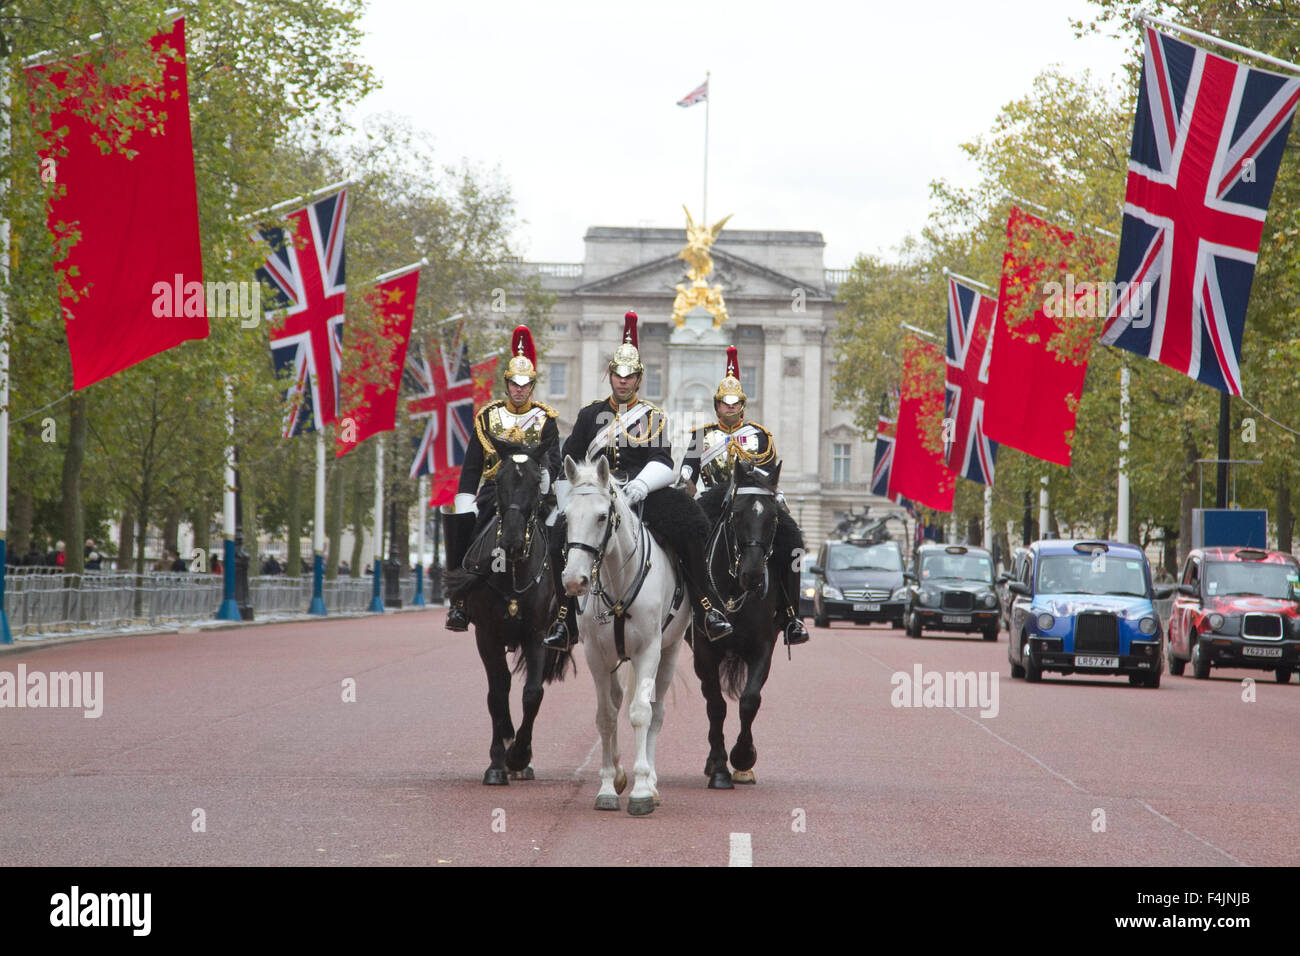 London,UK. 19th October 2015. The Mall is decorated with Union Jacks and Chinese flags ahead of the official state visit by President Xi Jinping who arrives on a four day stay to Britain as guest of Her Majesty The Queen at Buckingham Palace Credit:  amer ghazzal/Alamy Live News Stock Photo